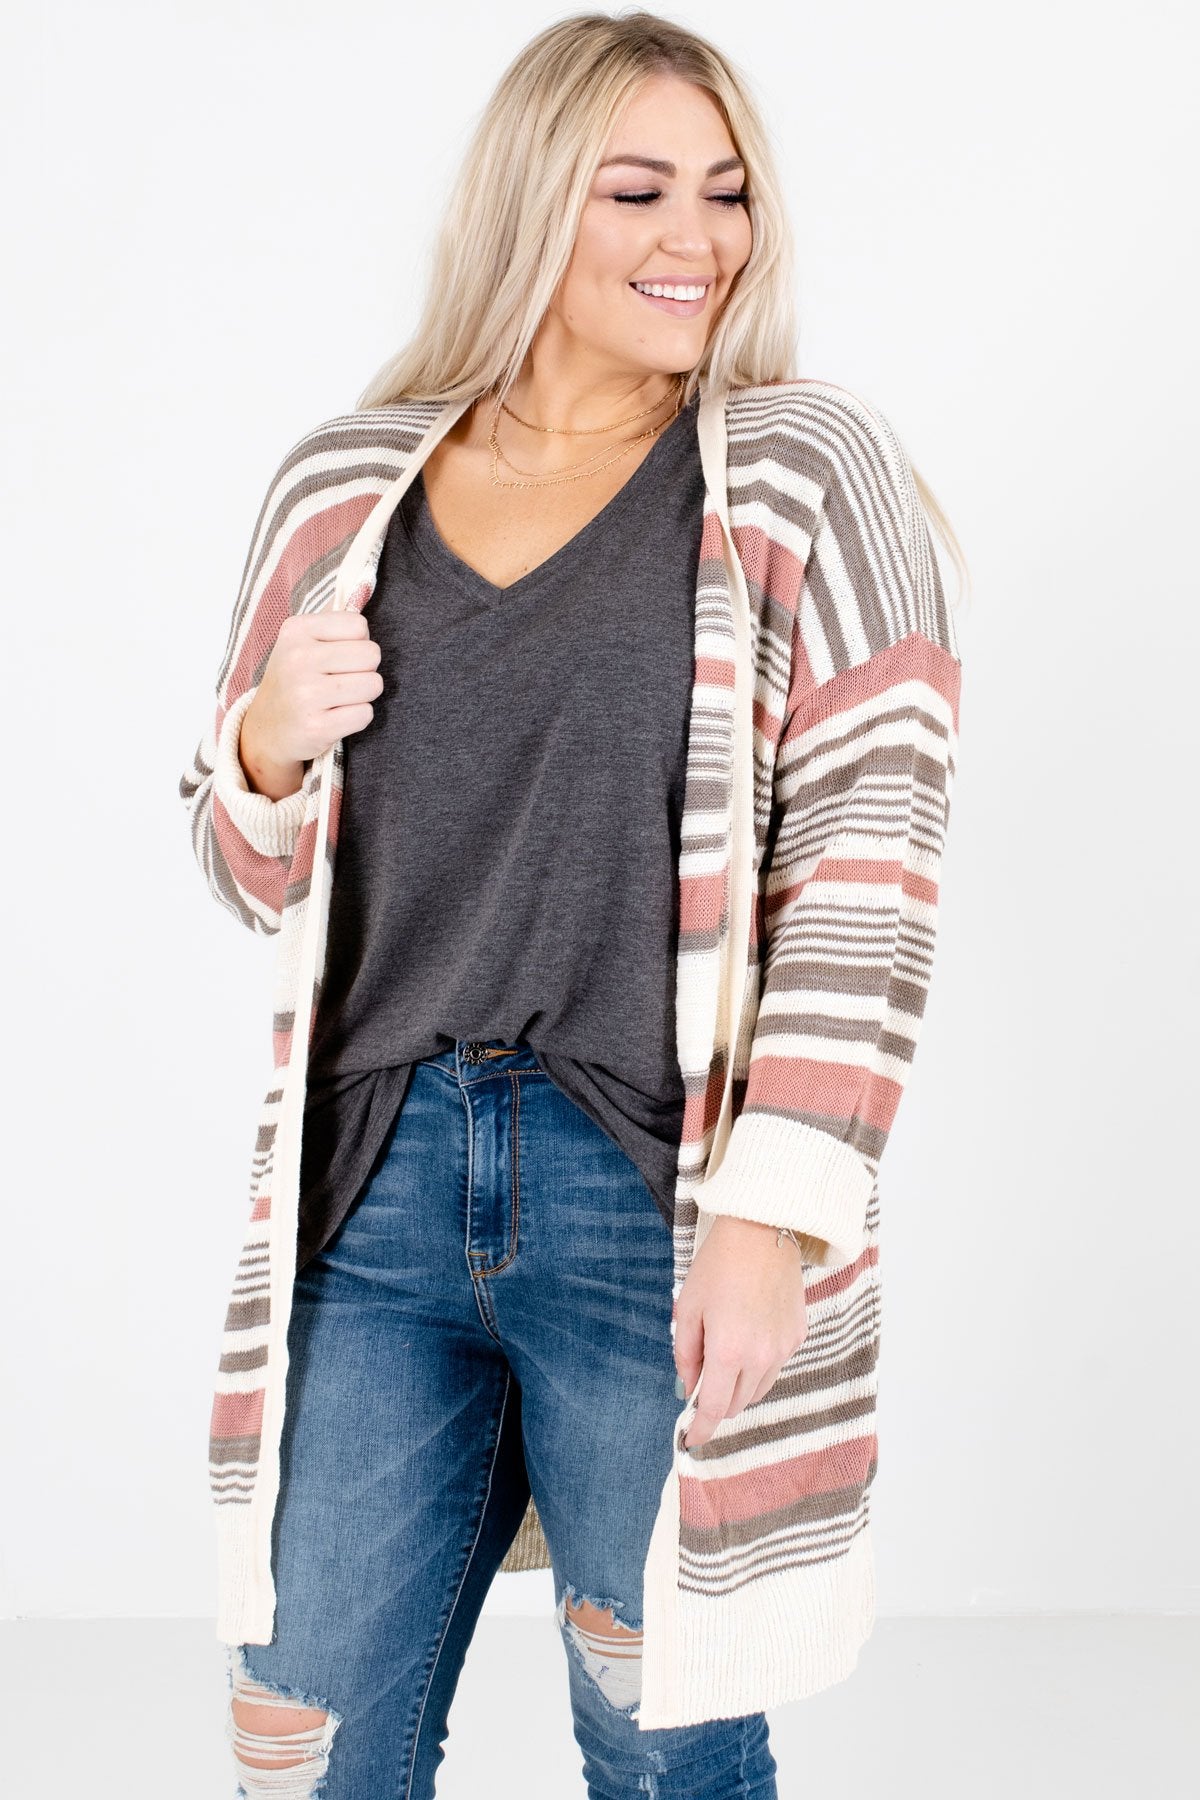 Mauve Cute and Comfortable Boutique Cardigans for Women